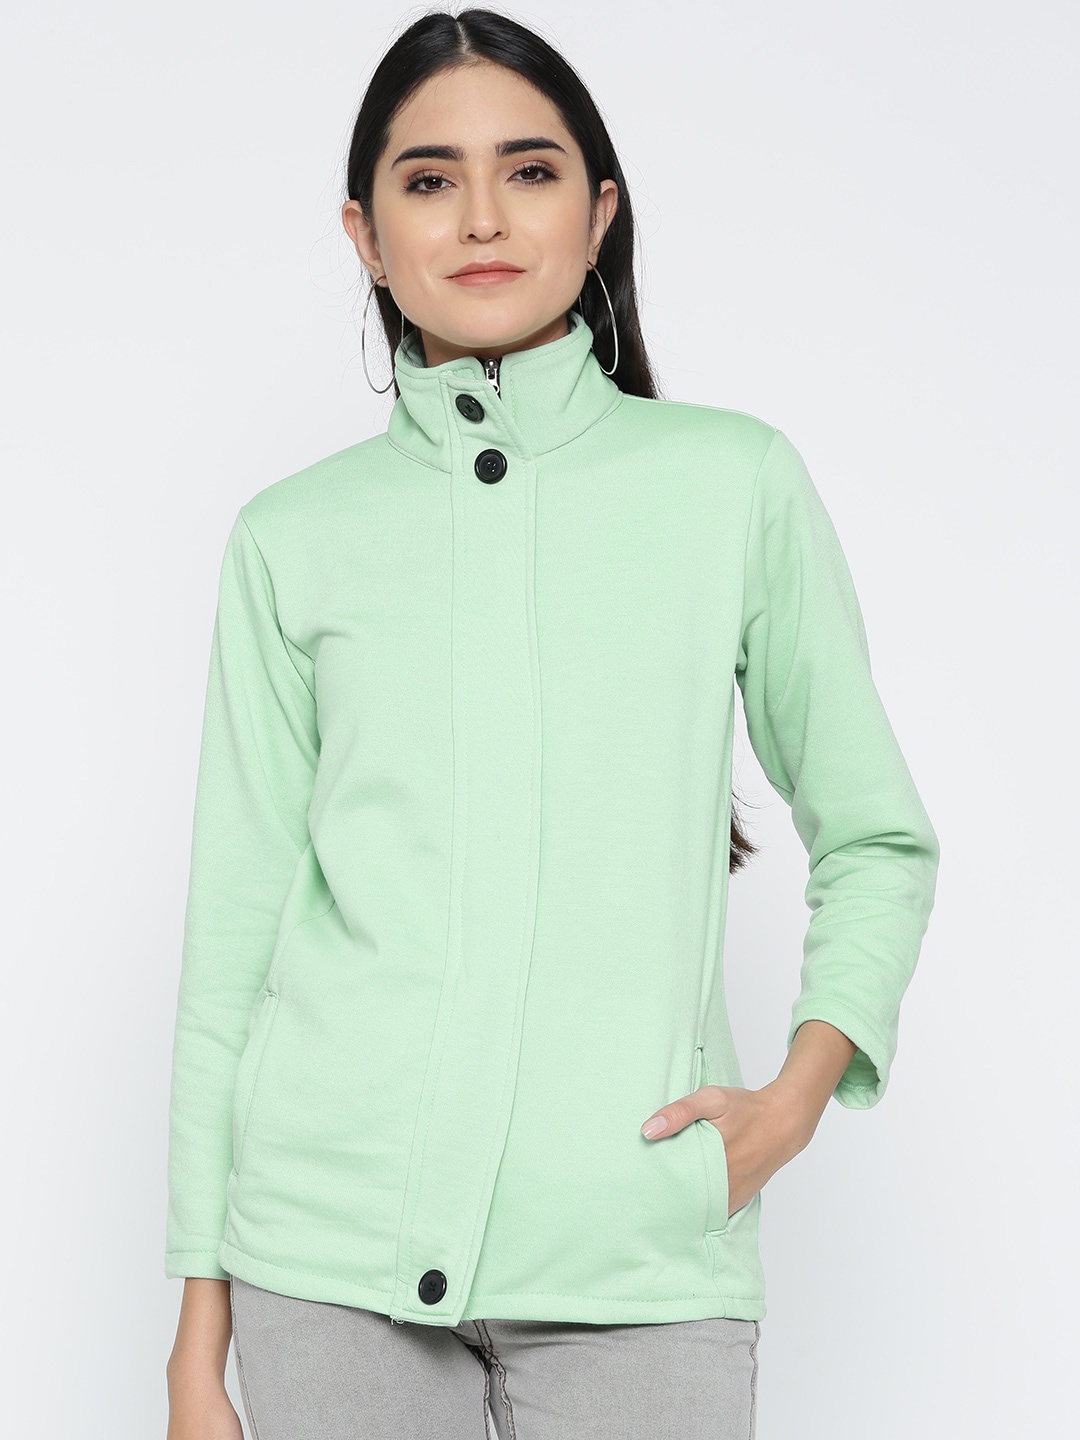 Belle Fille Women Sea Green Solid Tailored Jacket Price in India